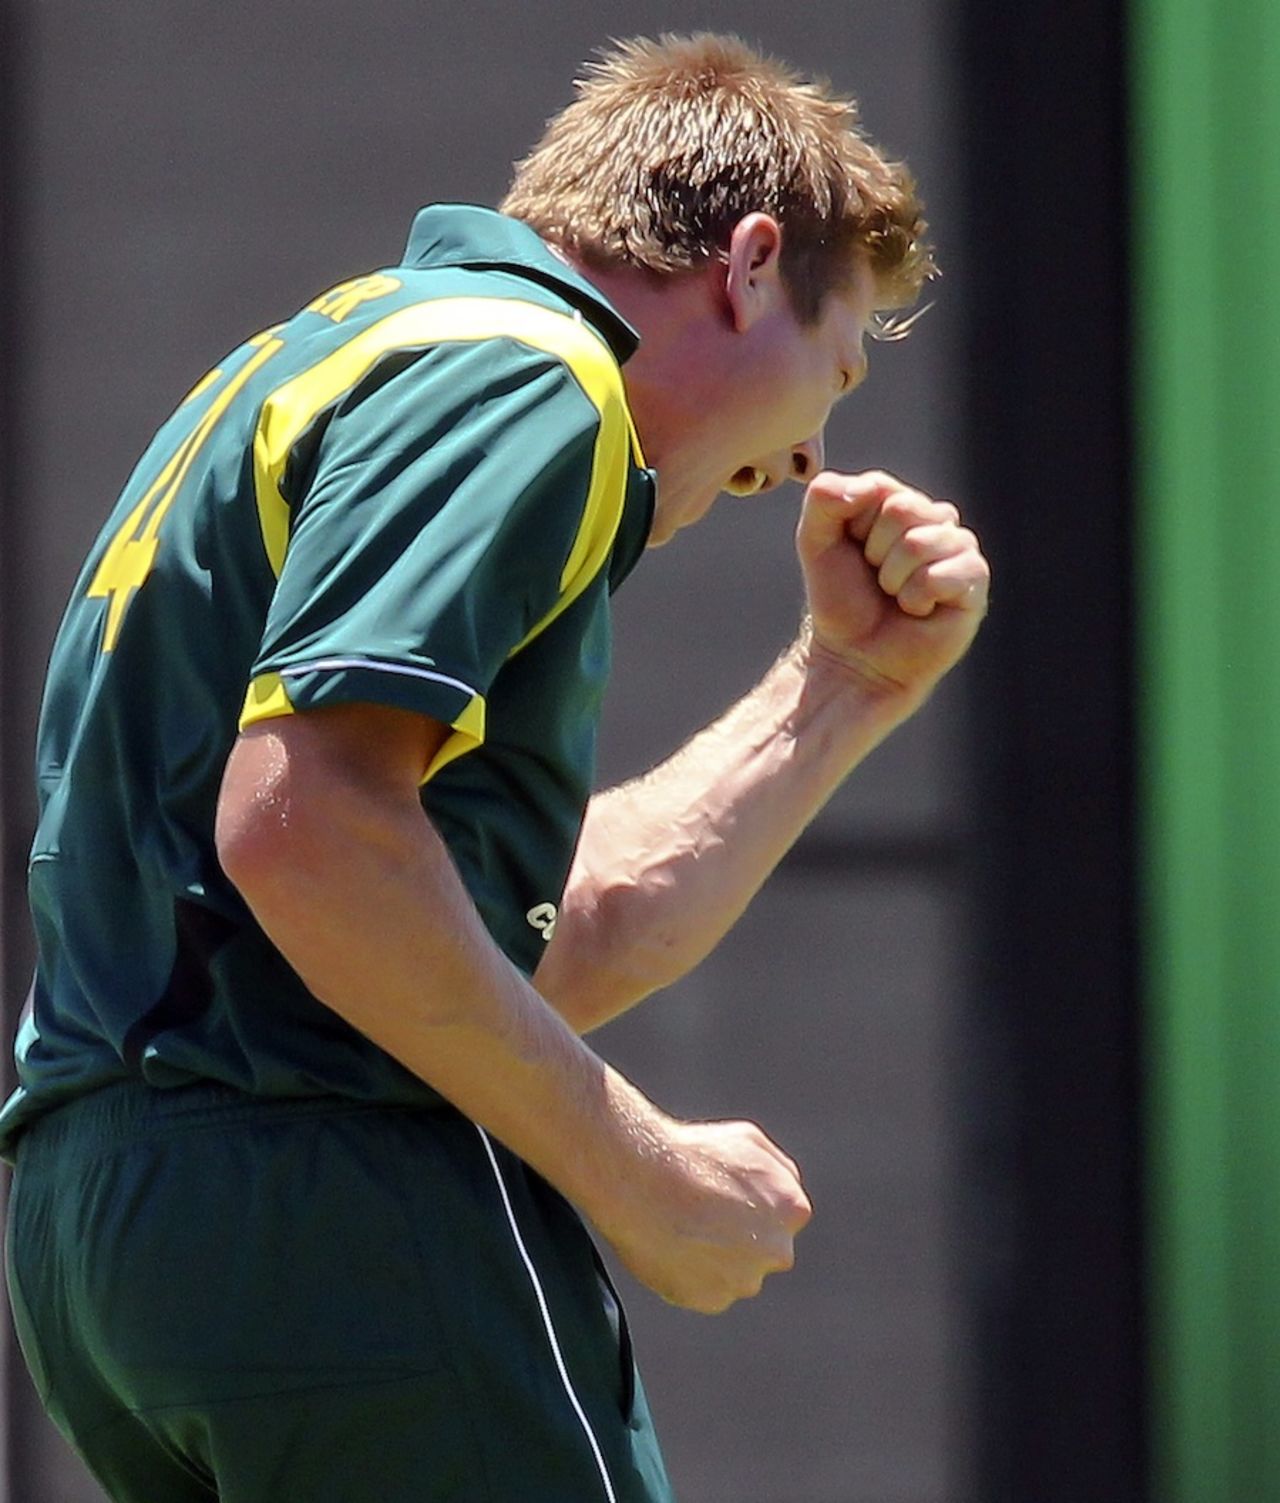 James Faulkner is pumped after his first ODI wicket, Australia v West Indies, 1st ODI, Perth, February 1, 2013